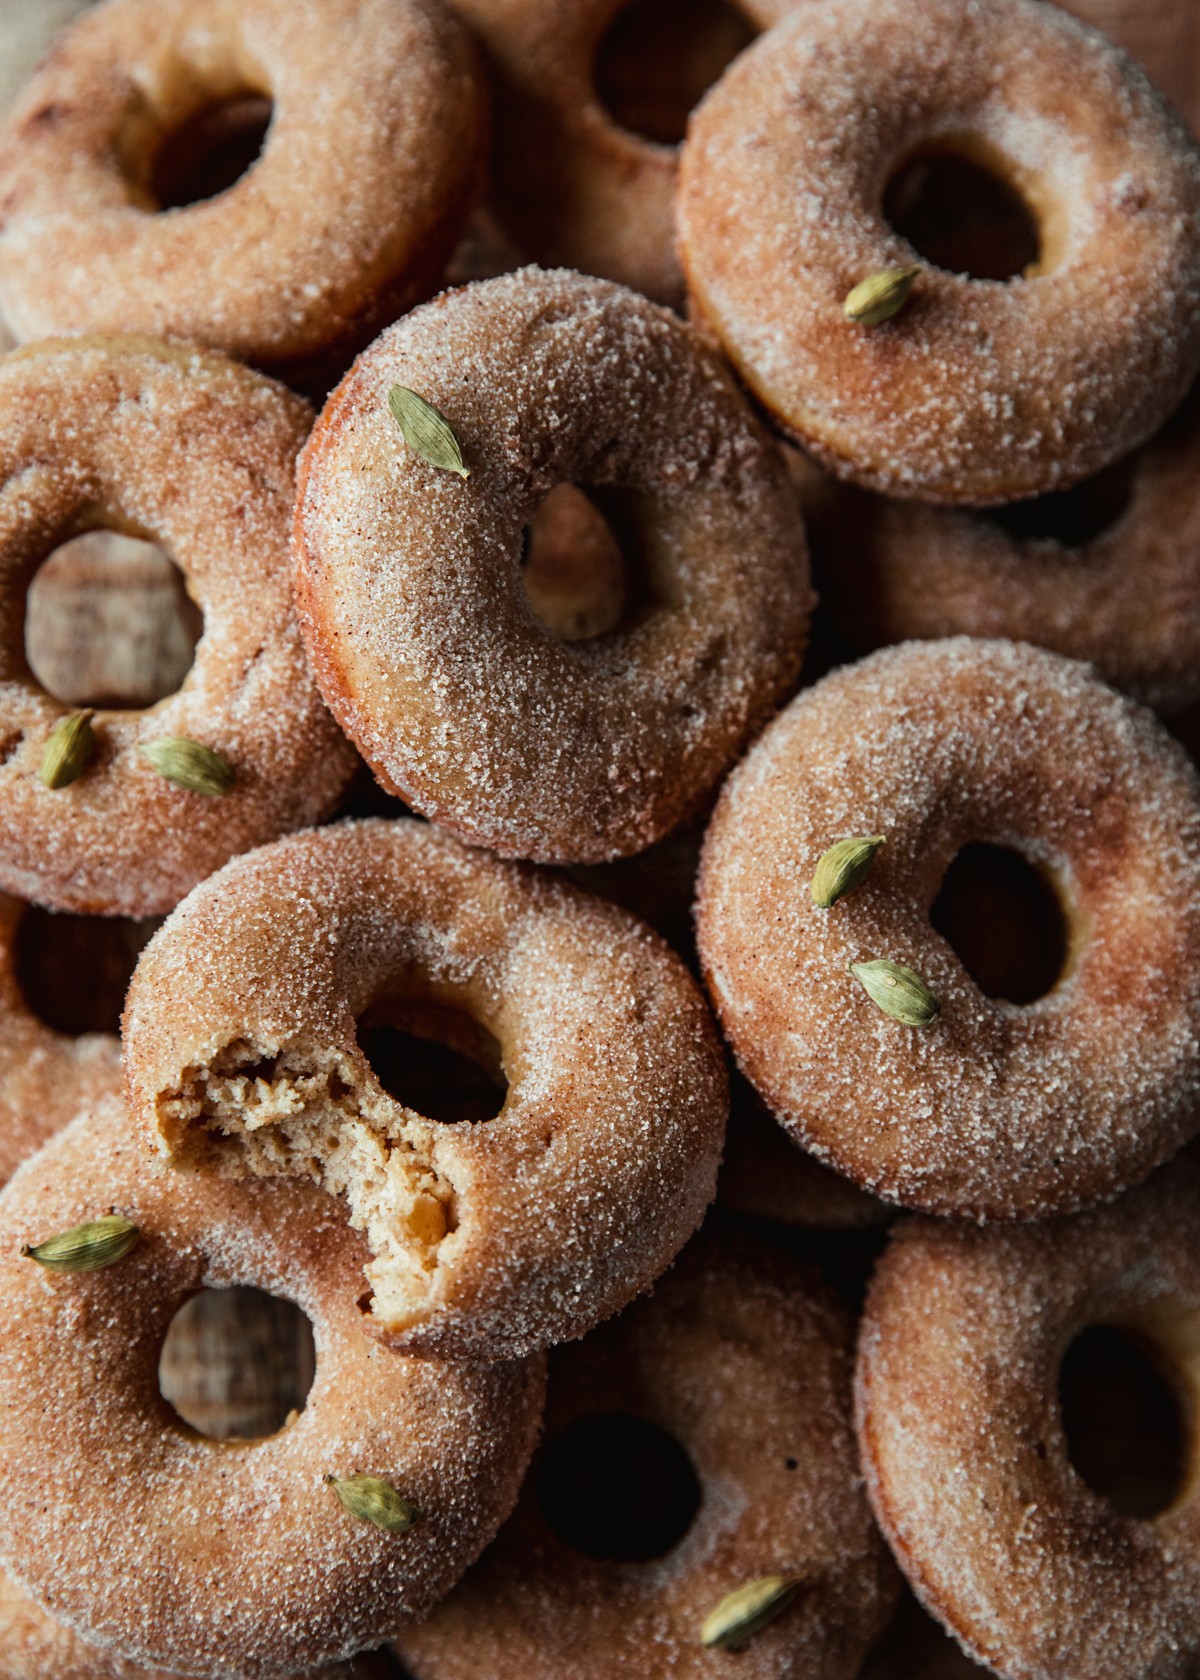 A very closeup overhead image of a stack of apple cider donuts topped with cardamom pods.